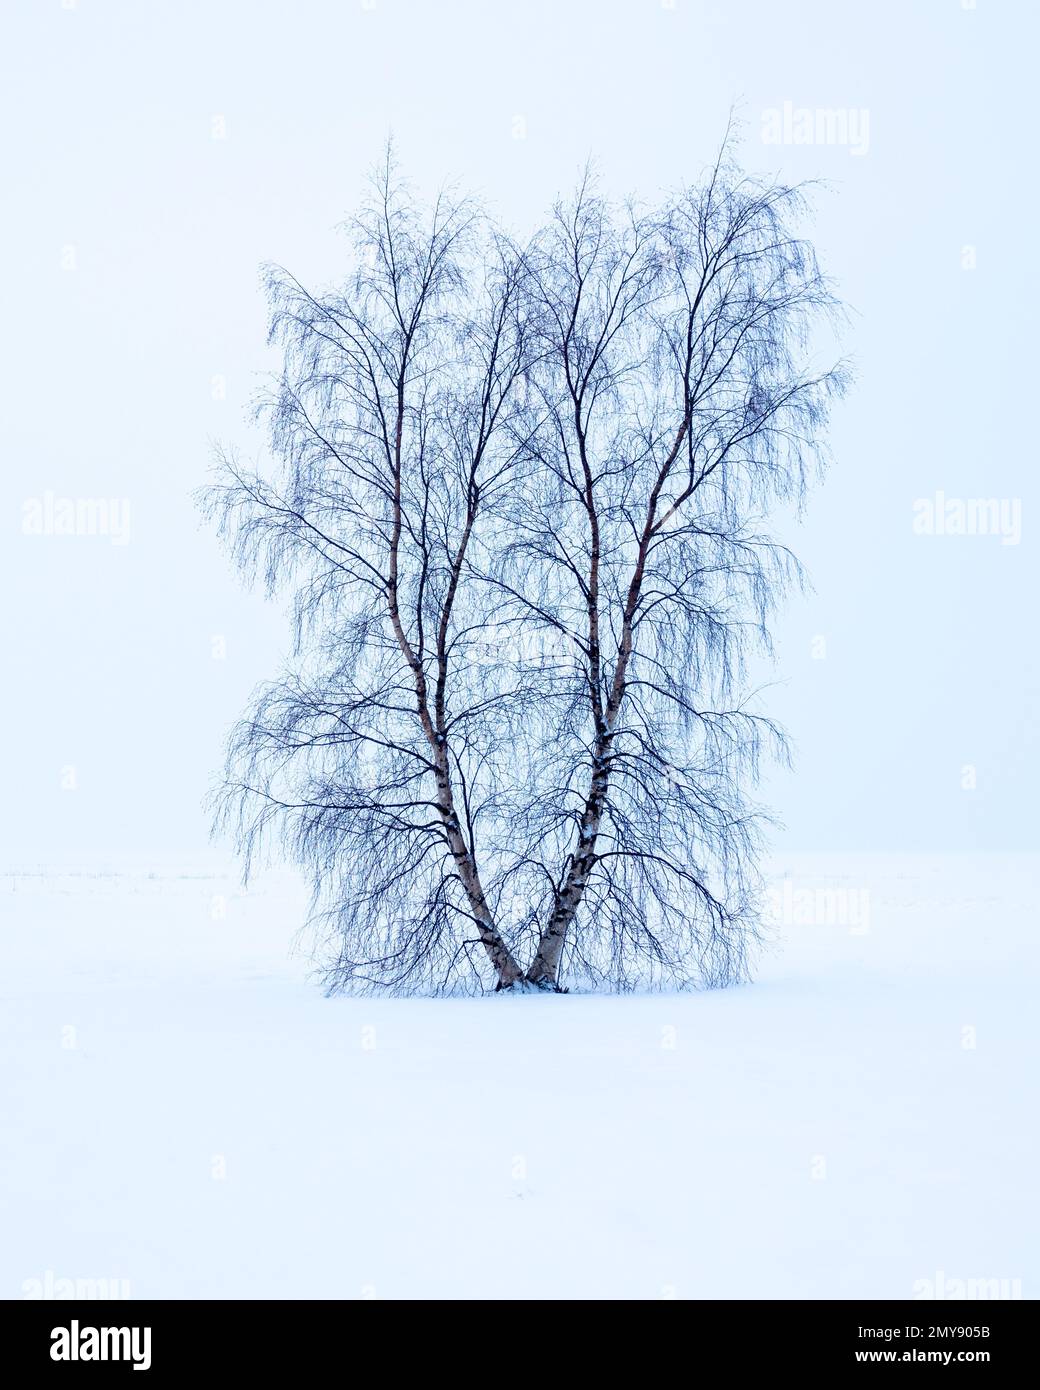 Two trees at winter time. Stock Photo